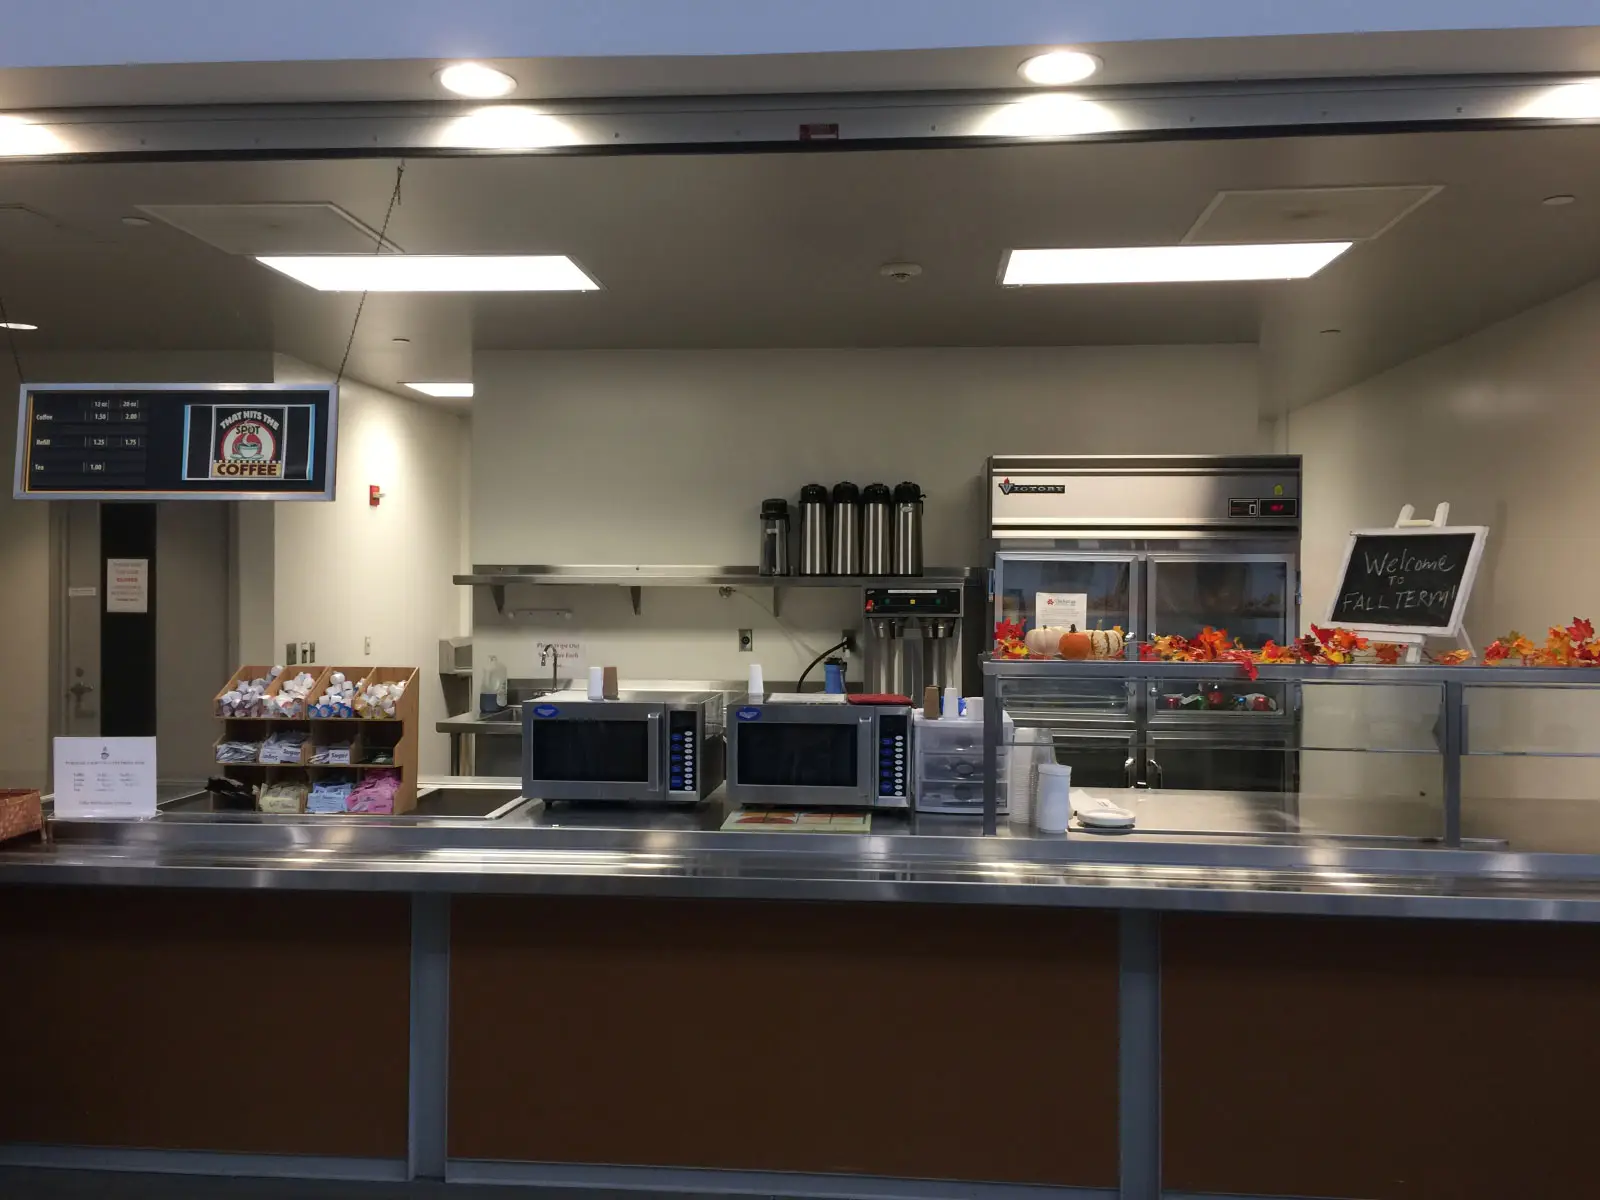 The front of the kitchen area with microwaves, refridgerator, counter and displays of the Wilsonville campus